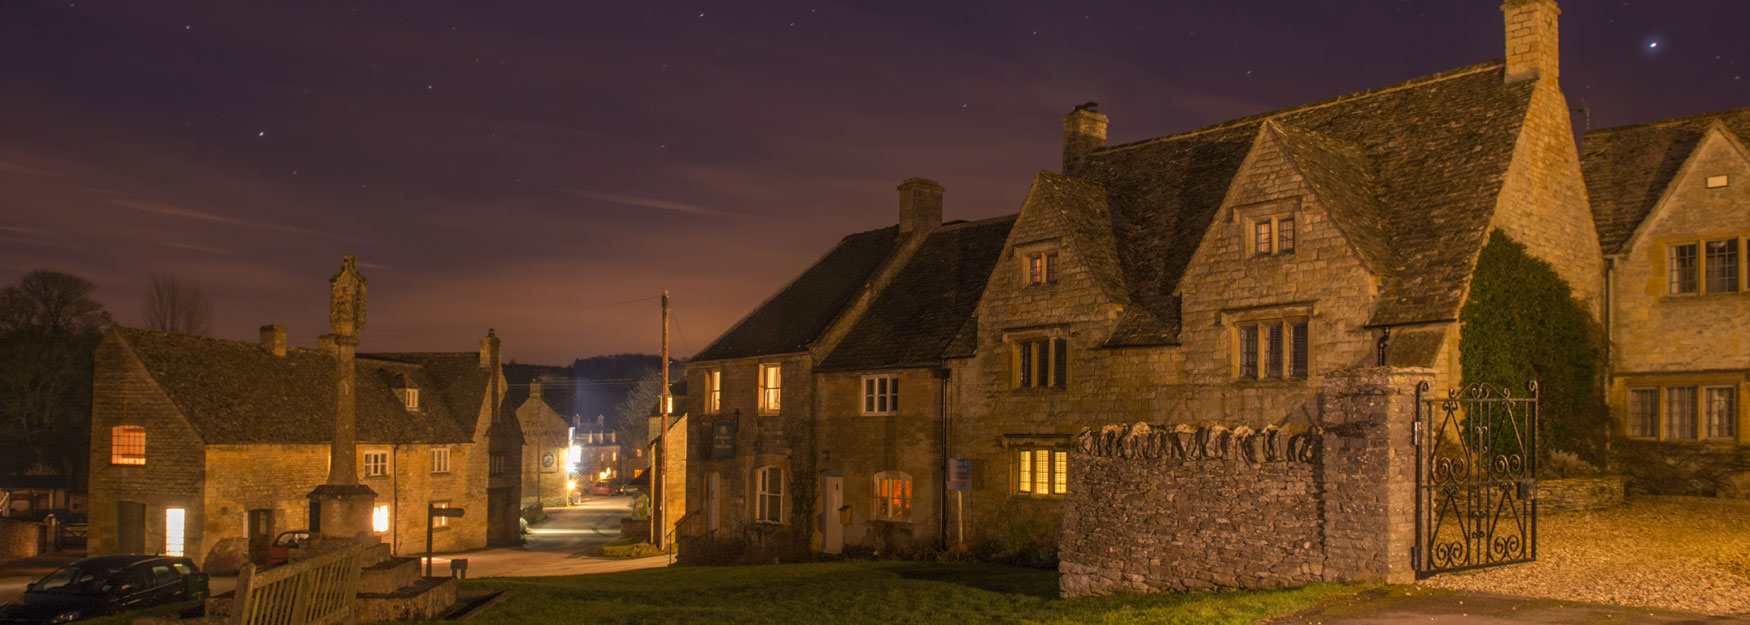 Another perfect night in the Cotswolds 
(Guiting Power - photo by The Picture Taker)